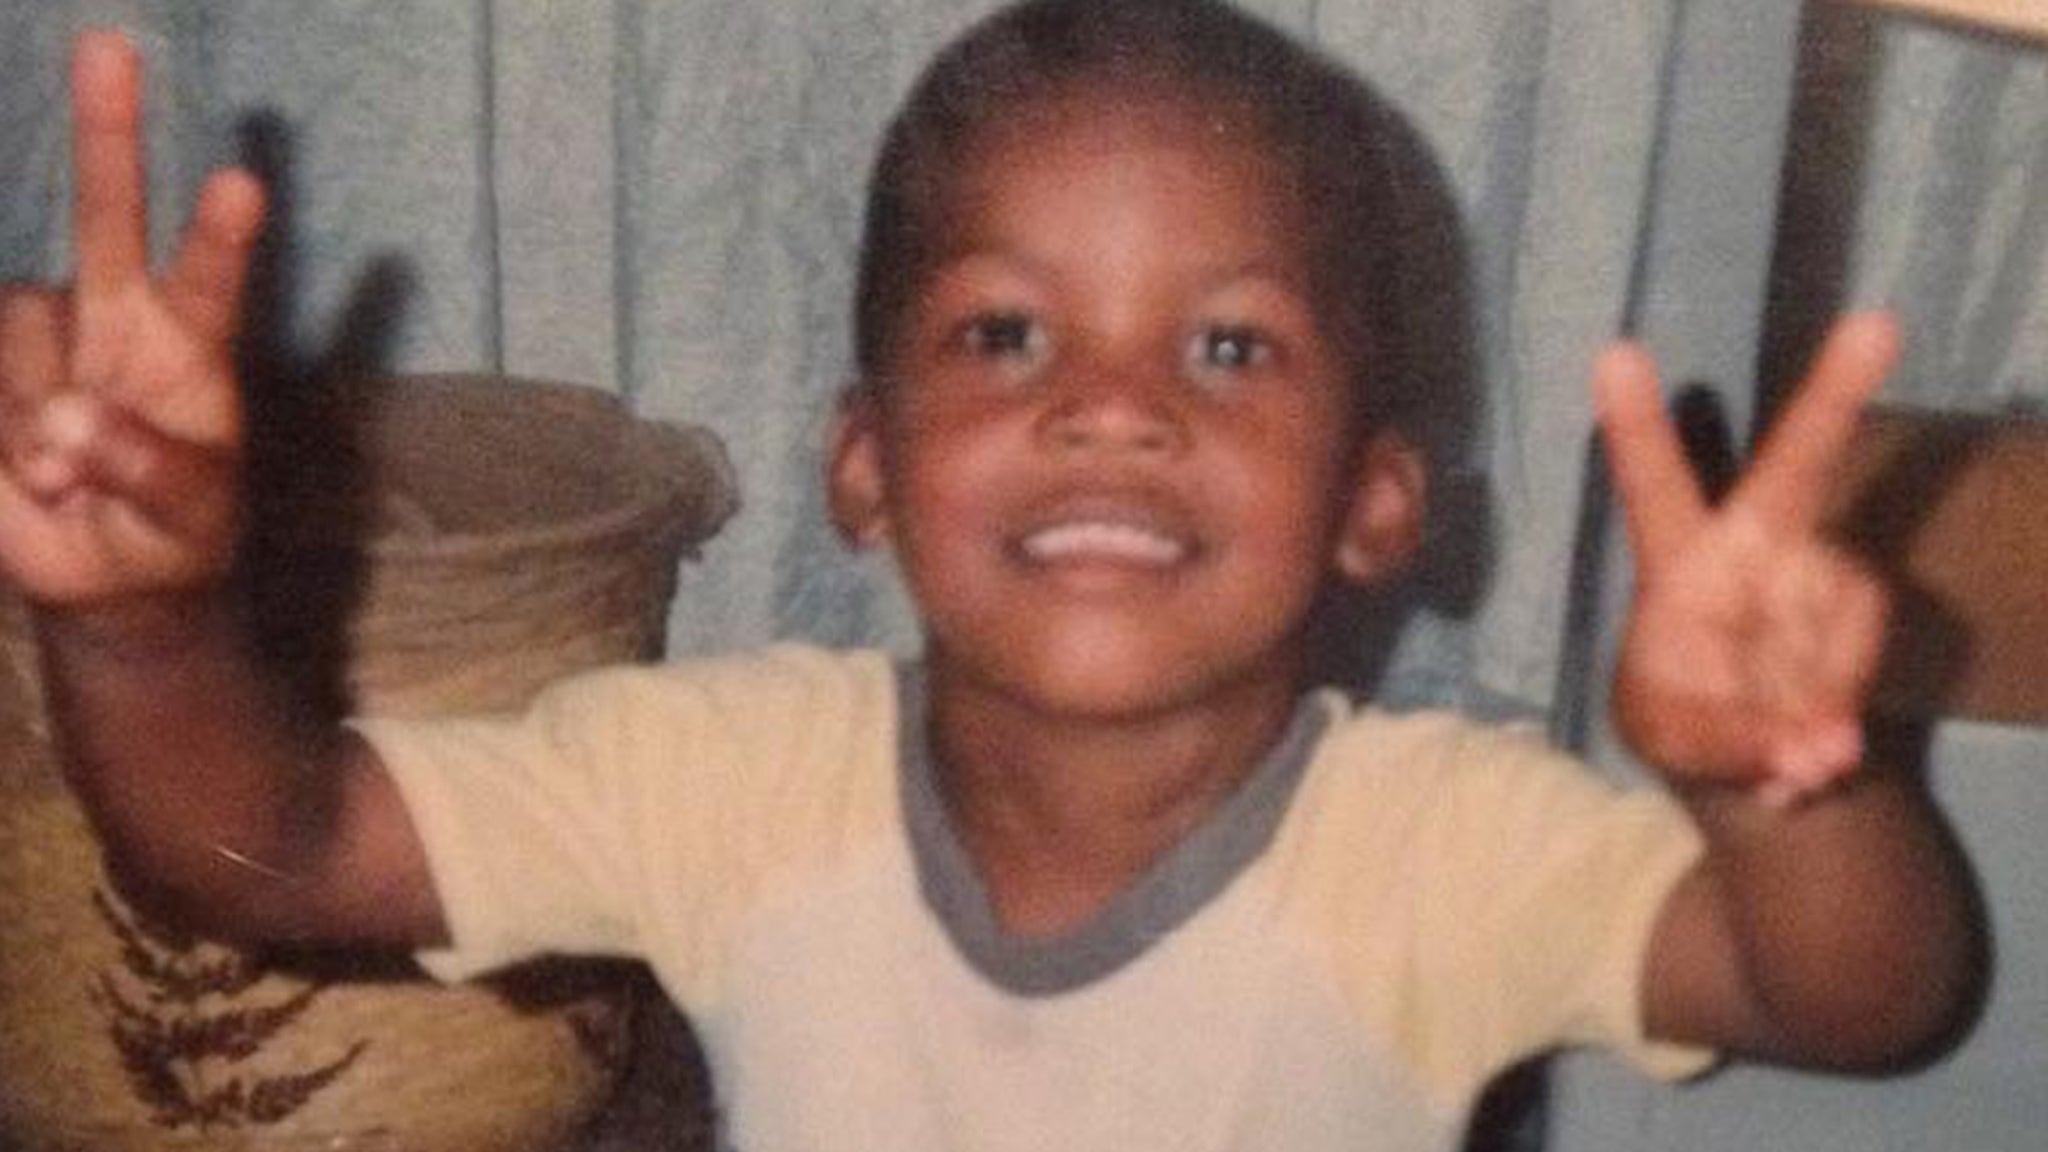 Guess Who This Future Pro Baller Turned Into!